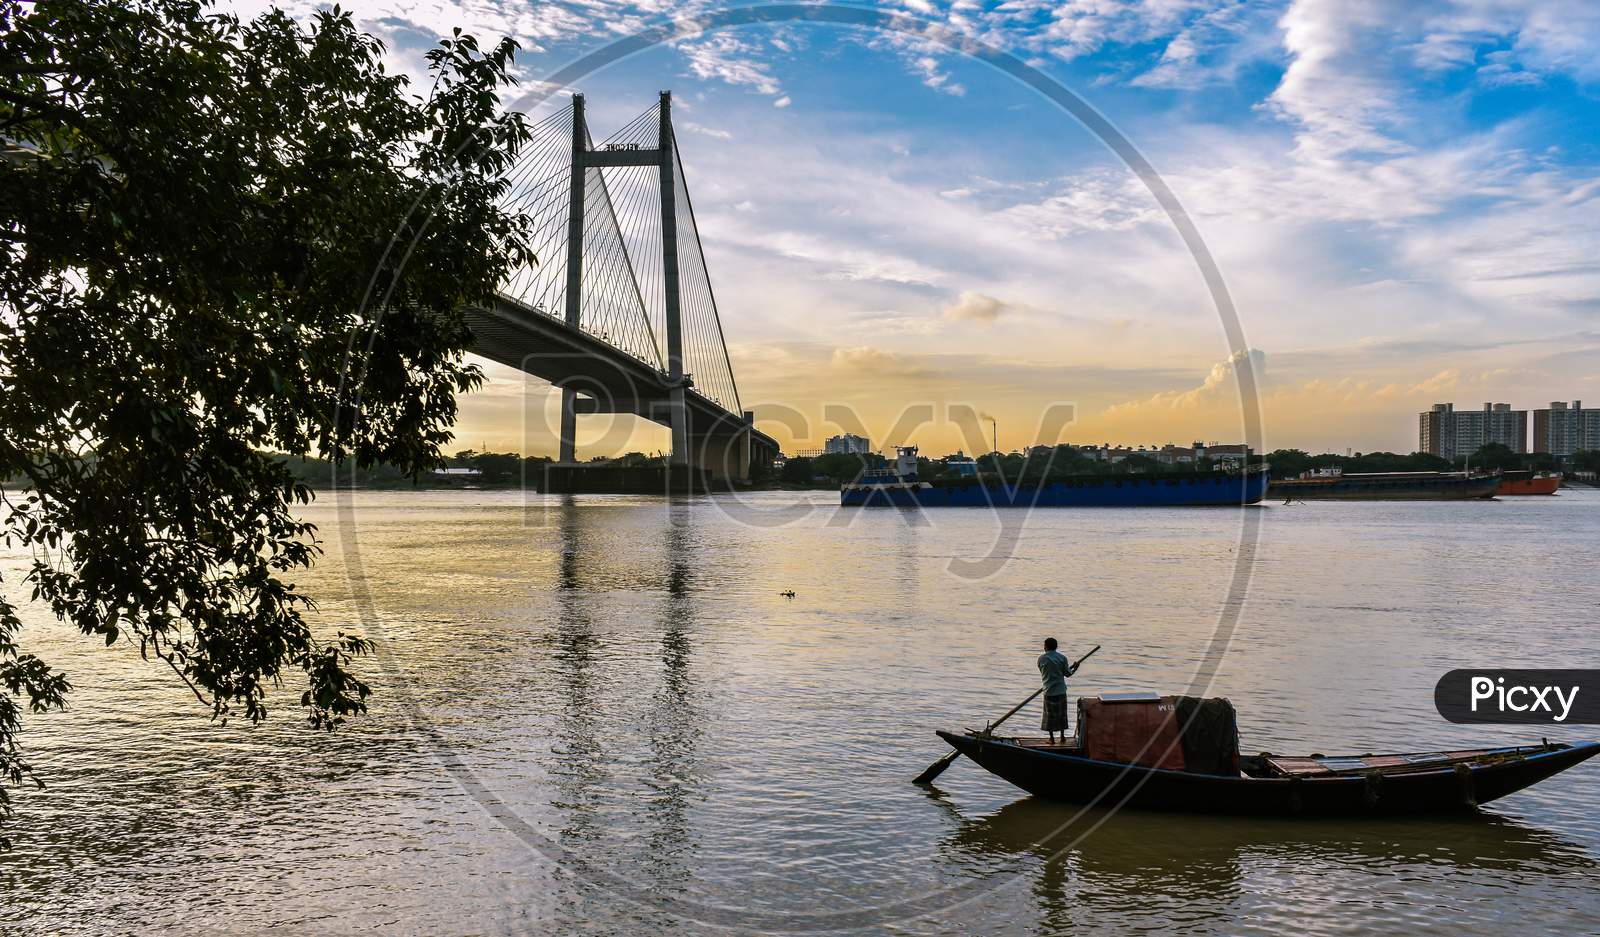 A view from Princep Ghat Kolkata with a Boat at the Evening Time